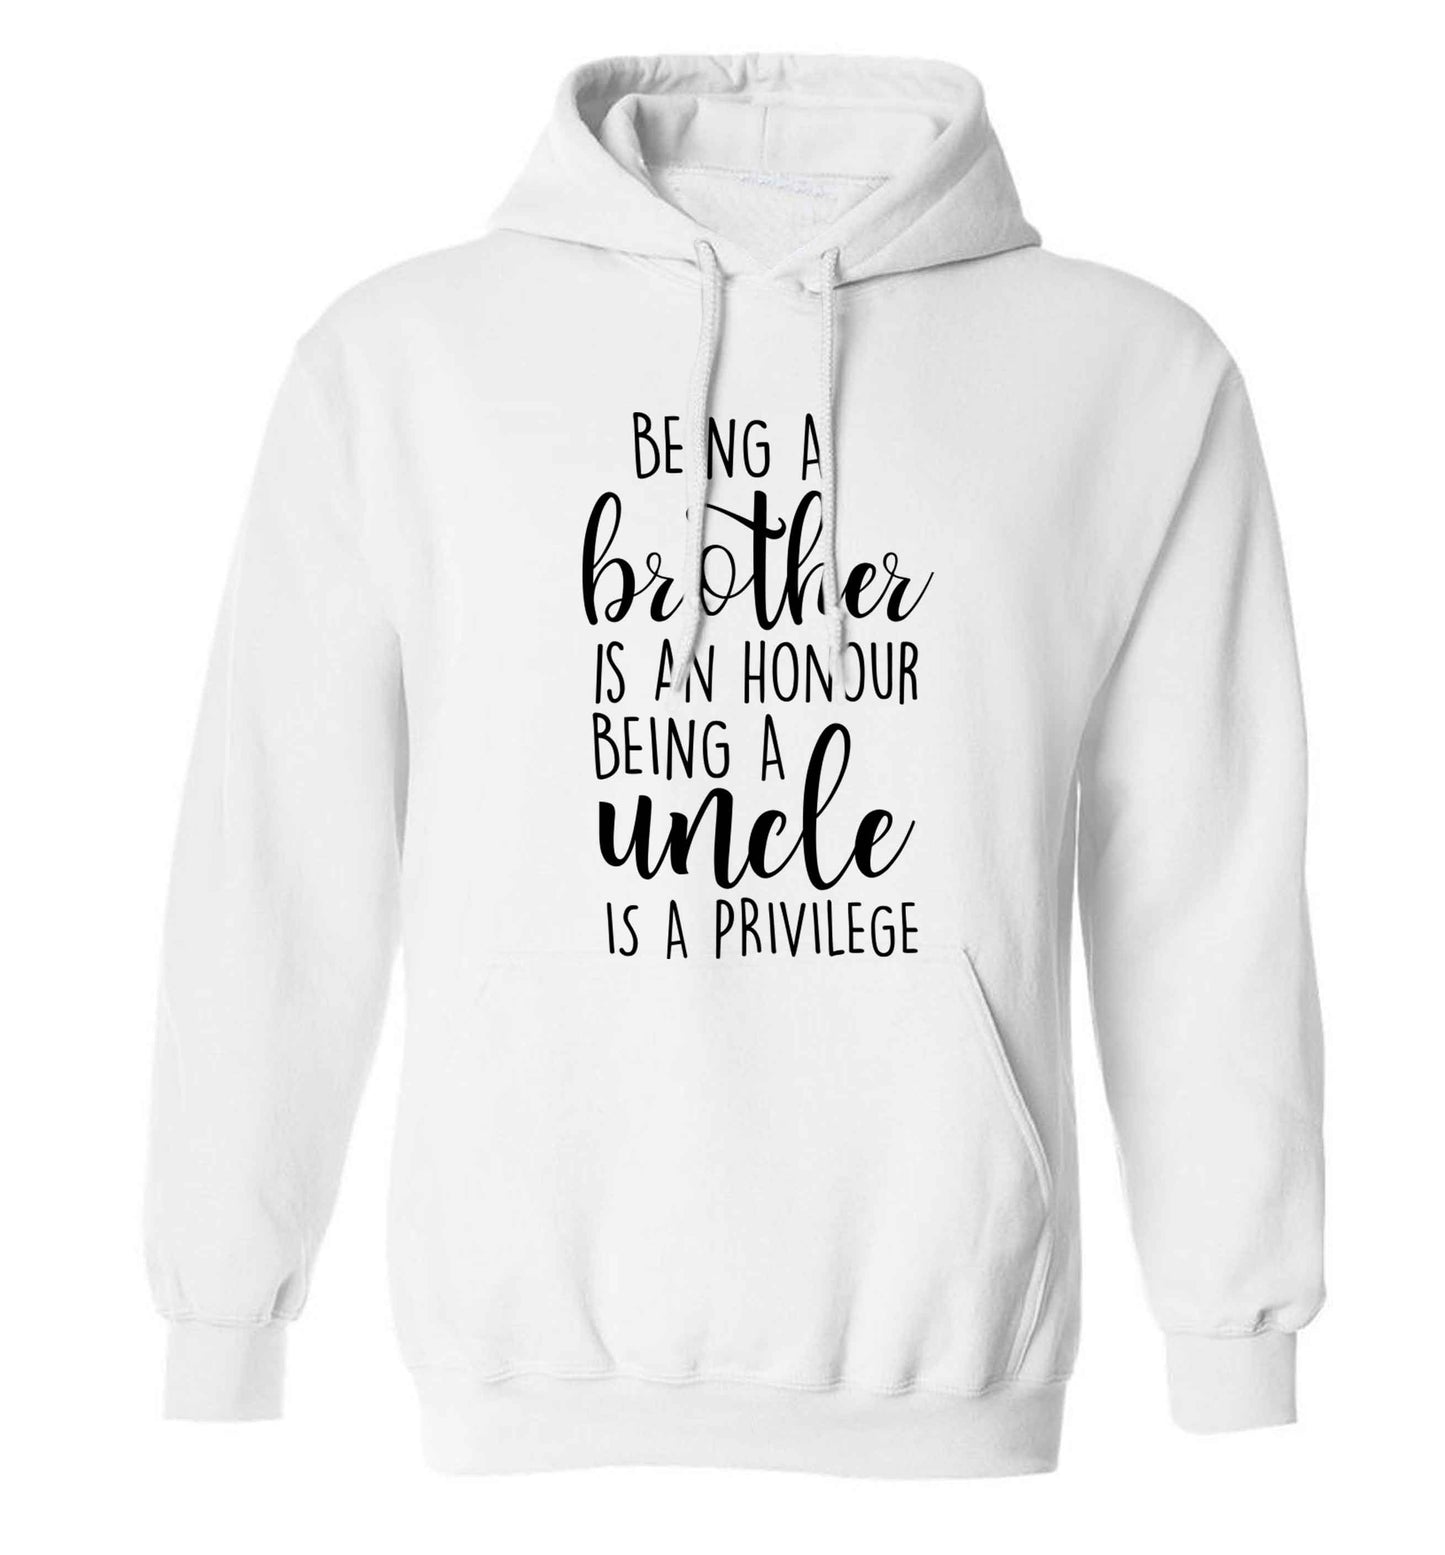 Being a brother is an honour being an uncle is a privilege adults unisex white hoodie 2XL